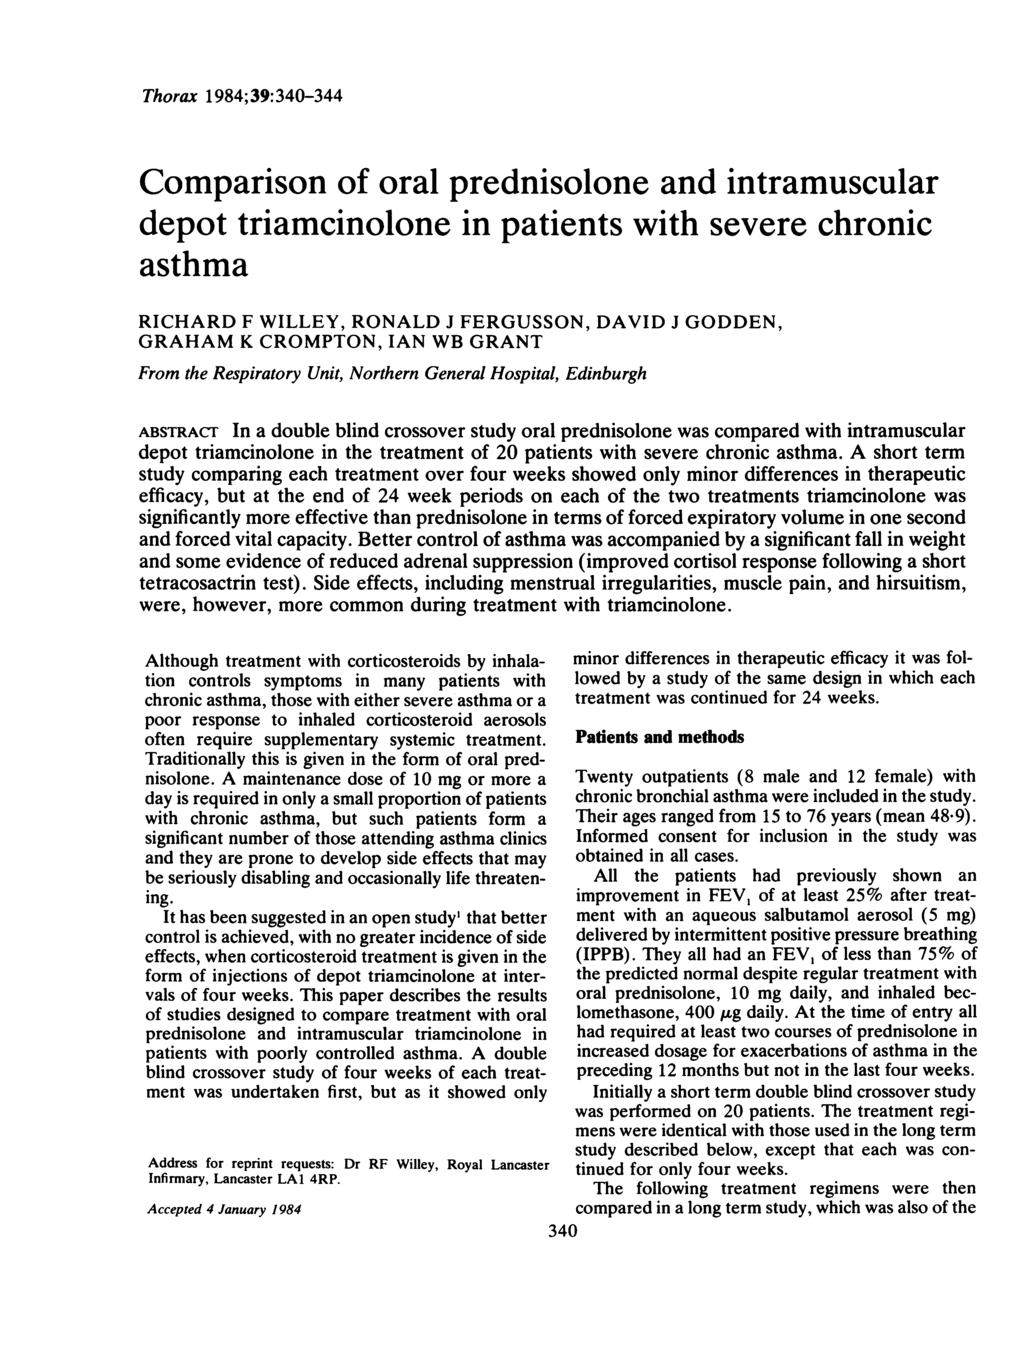 Thorax 1984;39:340-344 Comparison of oral prednisolone and intramuscular depot triamcinolone in patients with severe chronic asthma RICHARD F WILLEY, RONALD J FERGUSSON, DAVID J GODDEN, GRAHAM K